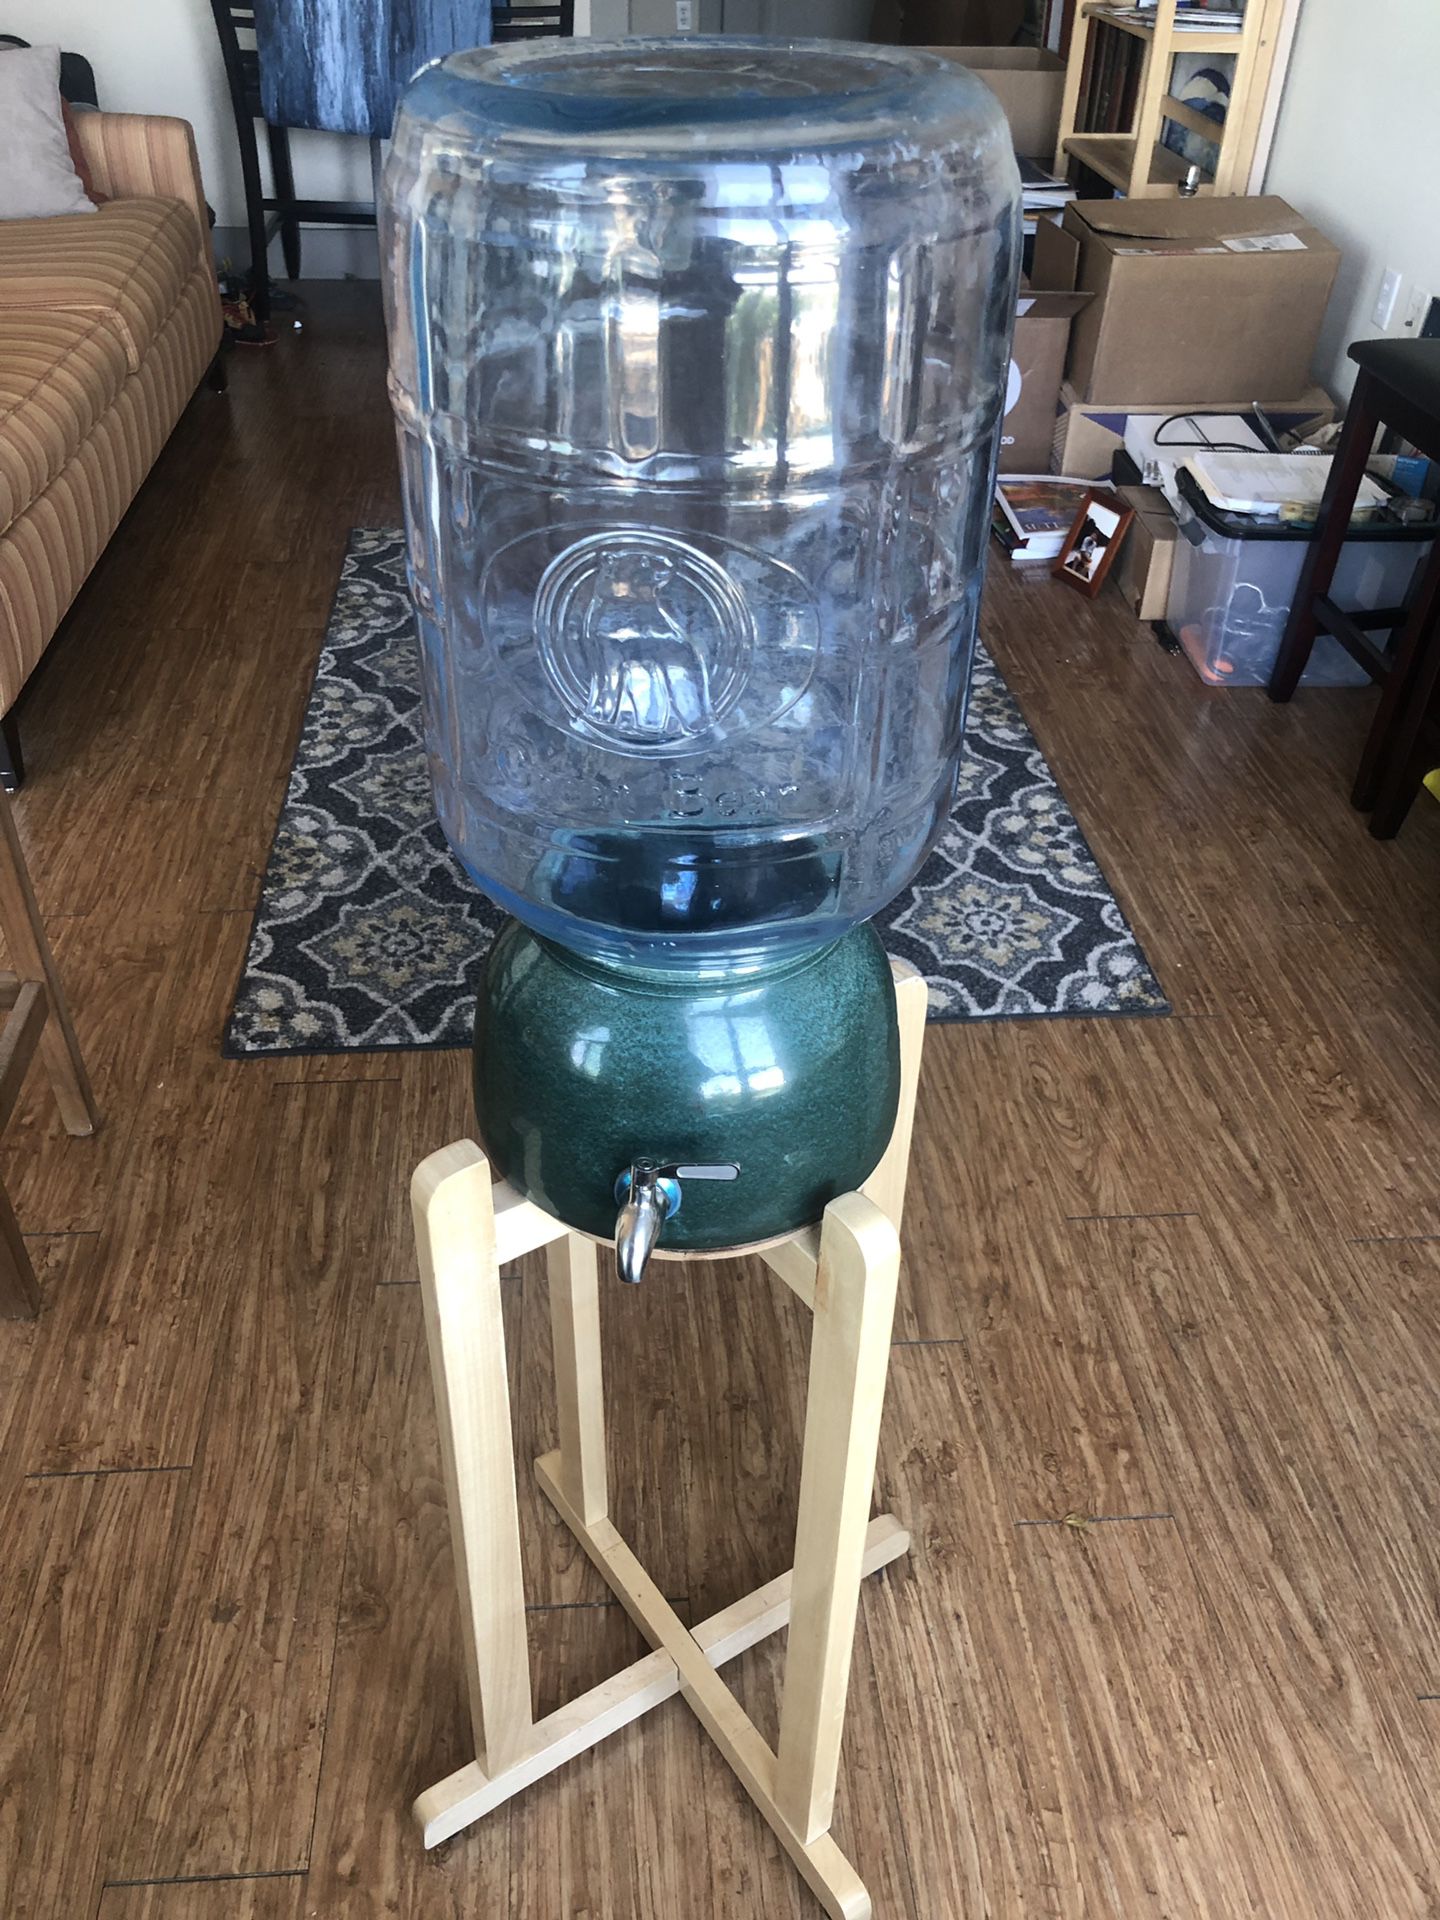 ANTIQUE Crisa “Great Bear” 5 Gal water bottle w/dispenser, stand—PRICE REDUCED!